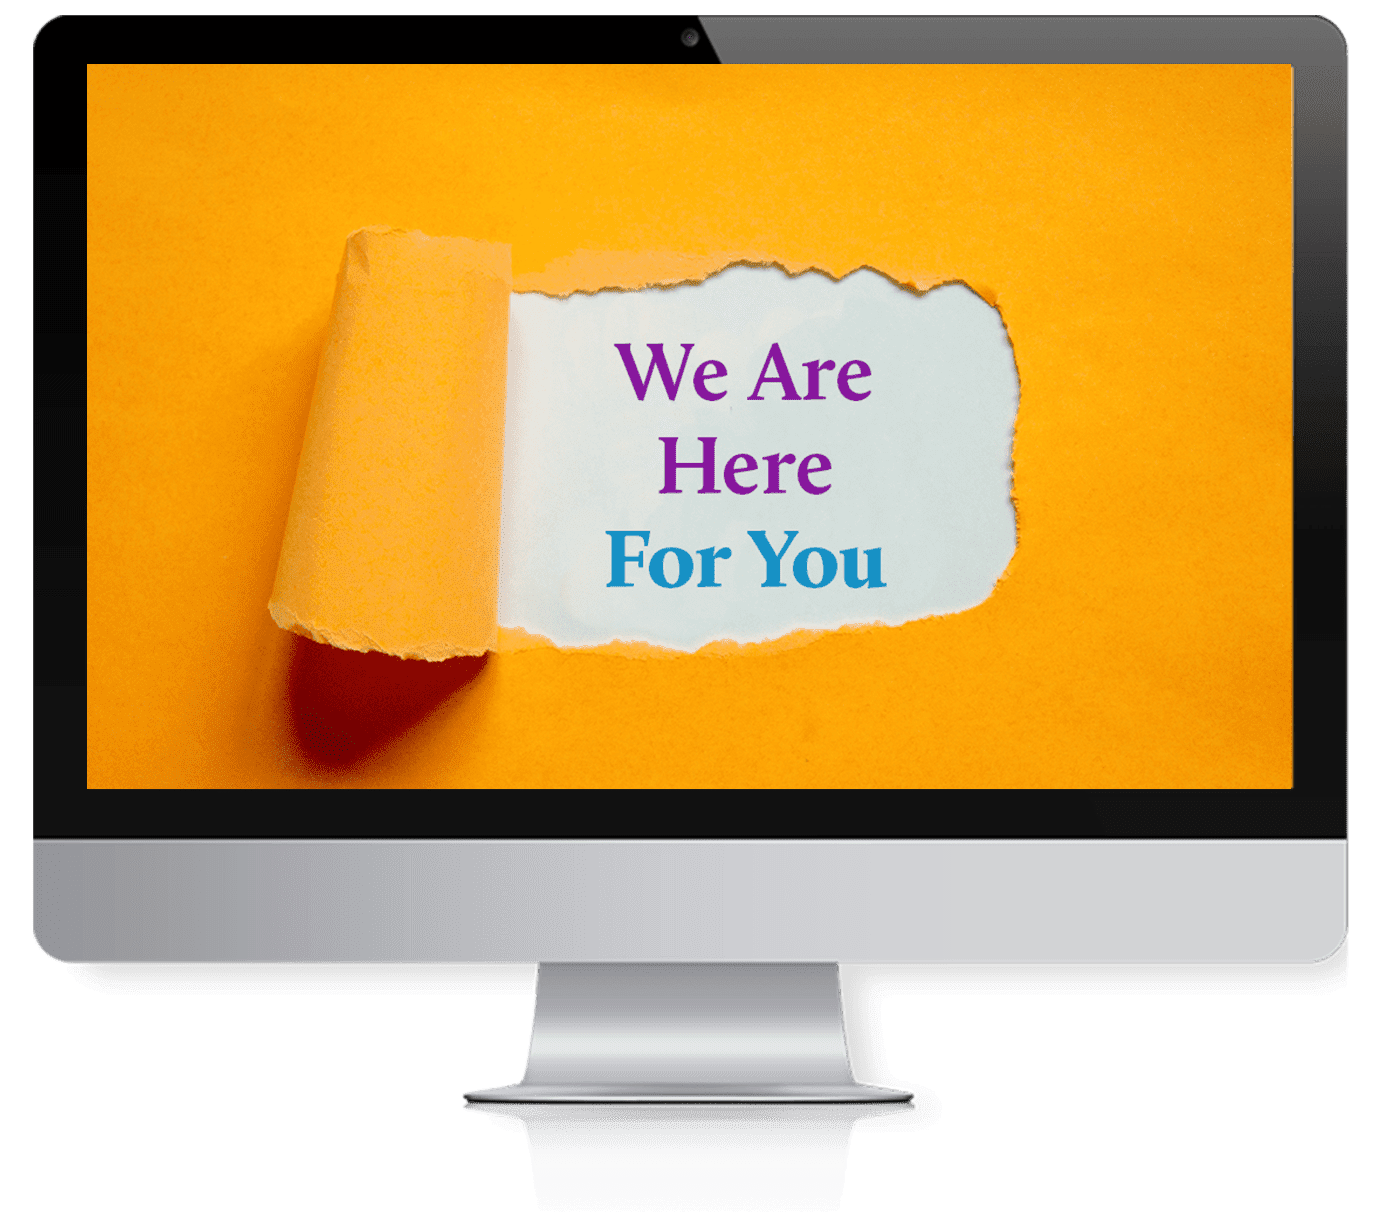 We Are Here For You in Desktop